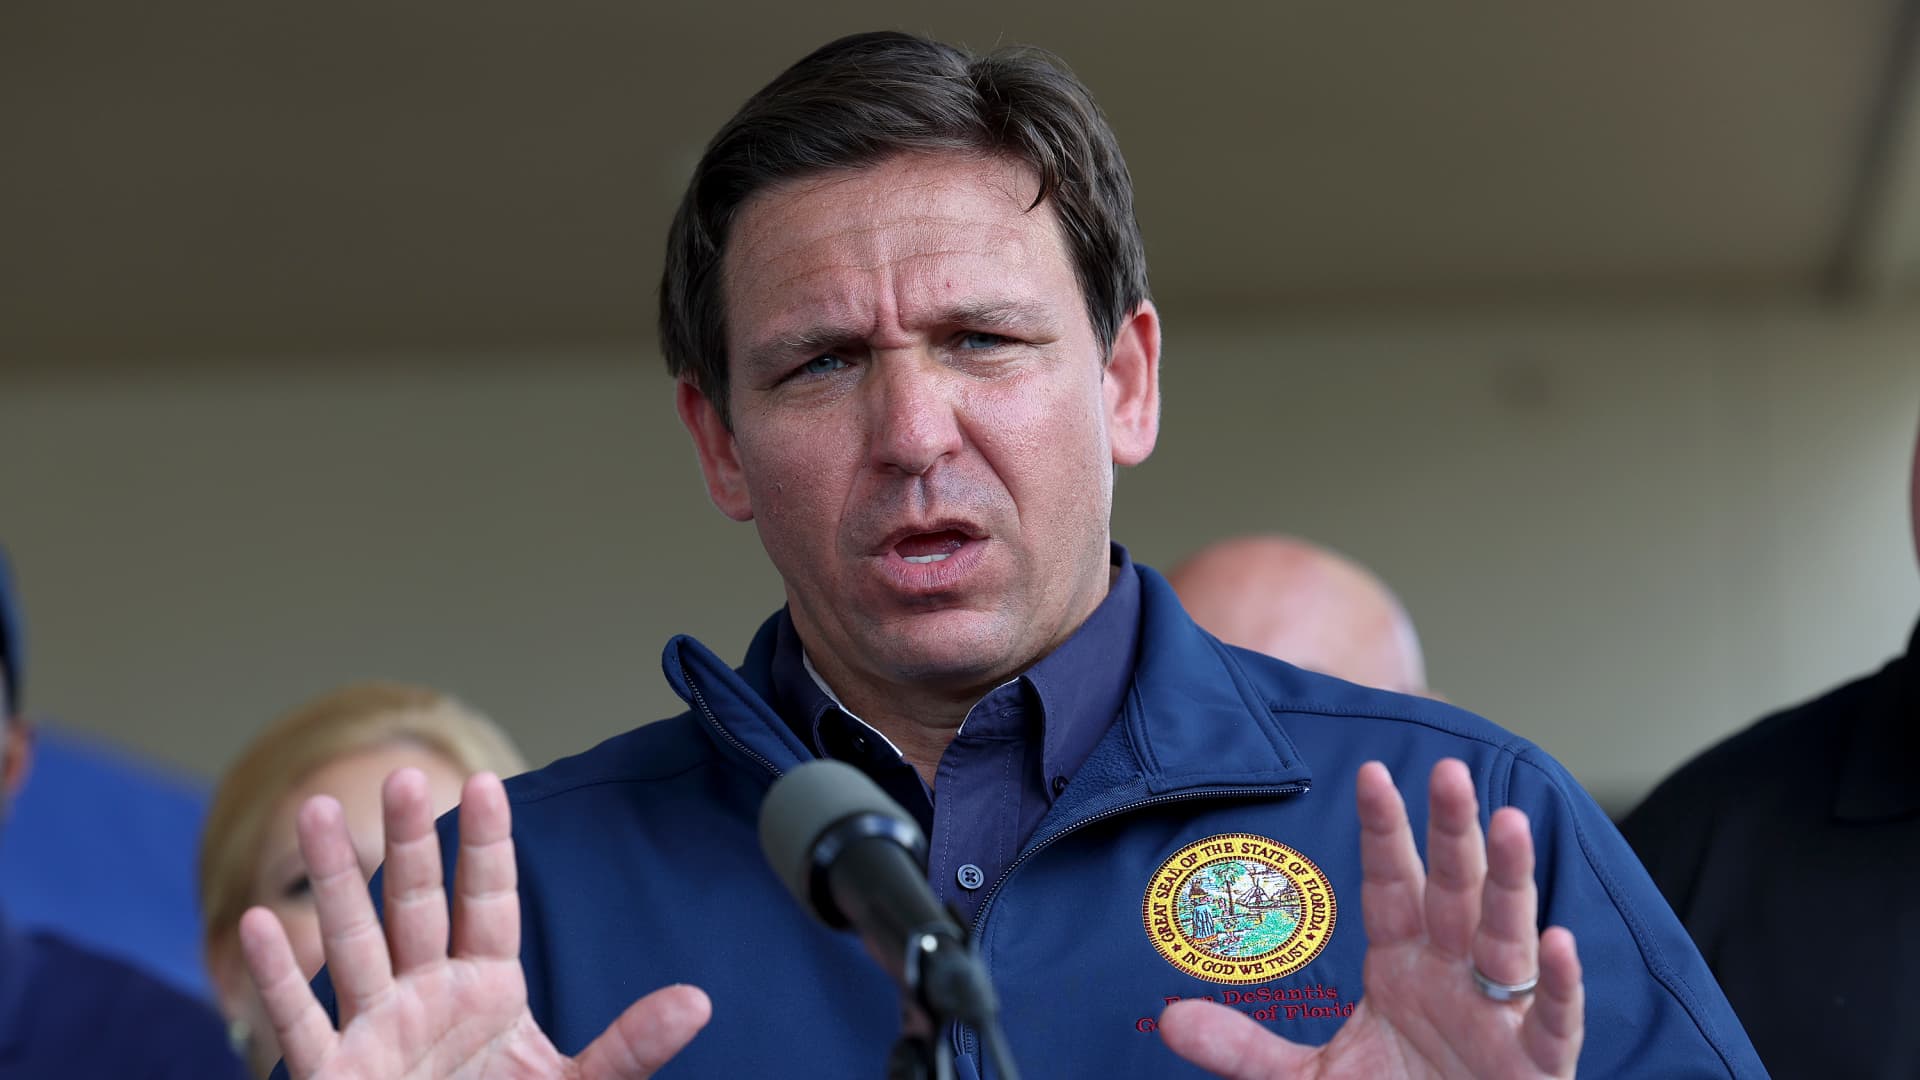 Florida Governor Ron DeSantis speaks during a press conference to update information about the on ongoing efforts to help people after hurricane Ian passed through the area on October 4, 2022 in Cape Coral, Florida.